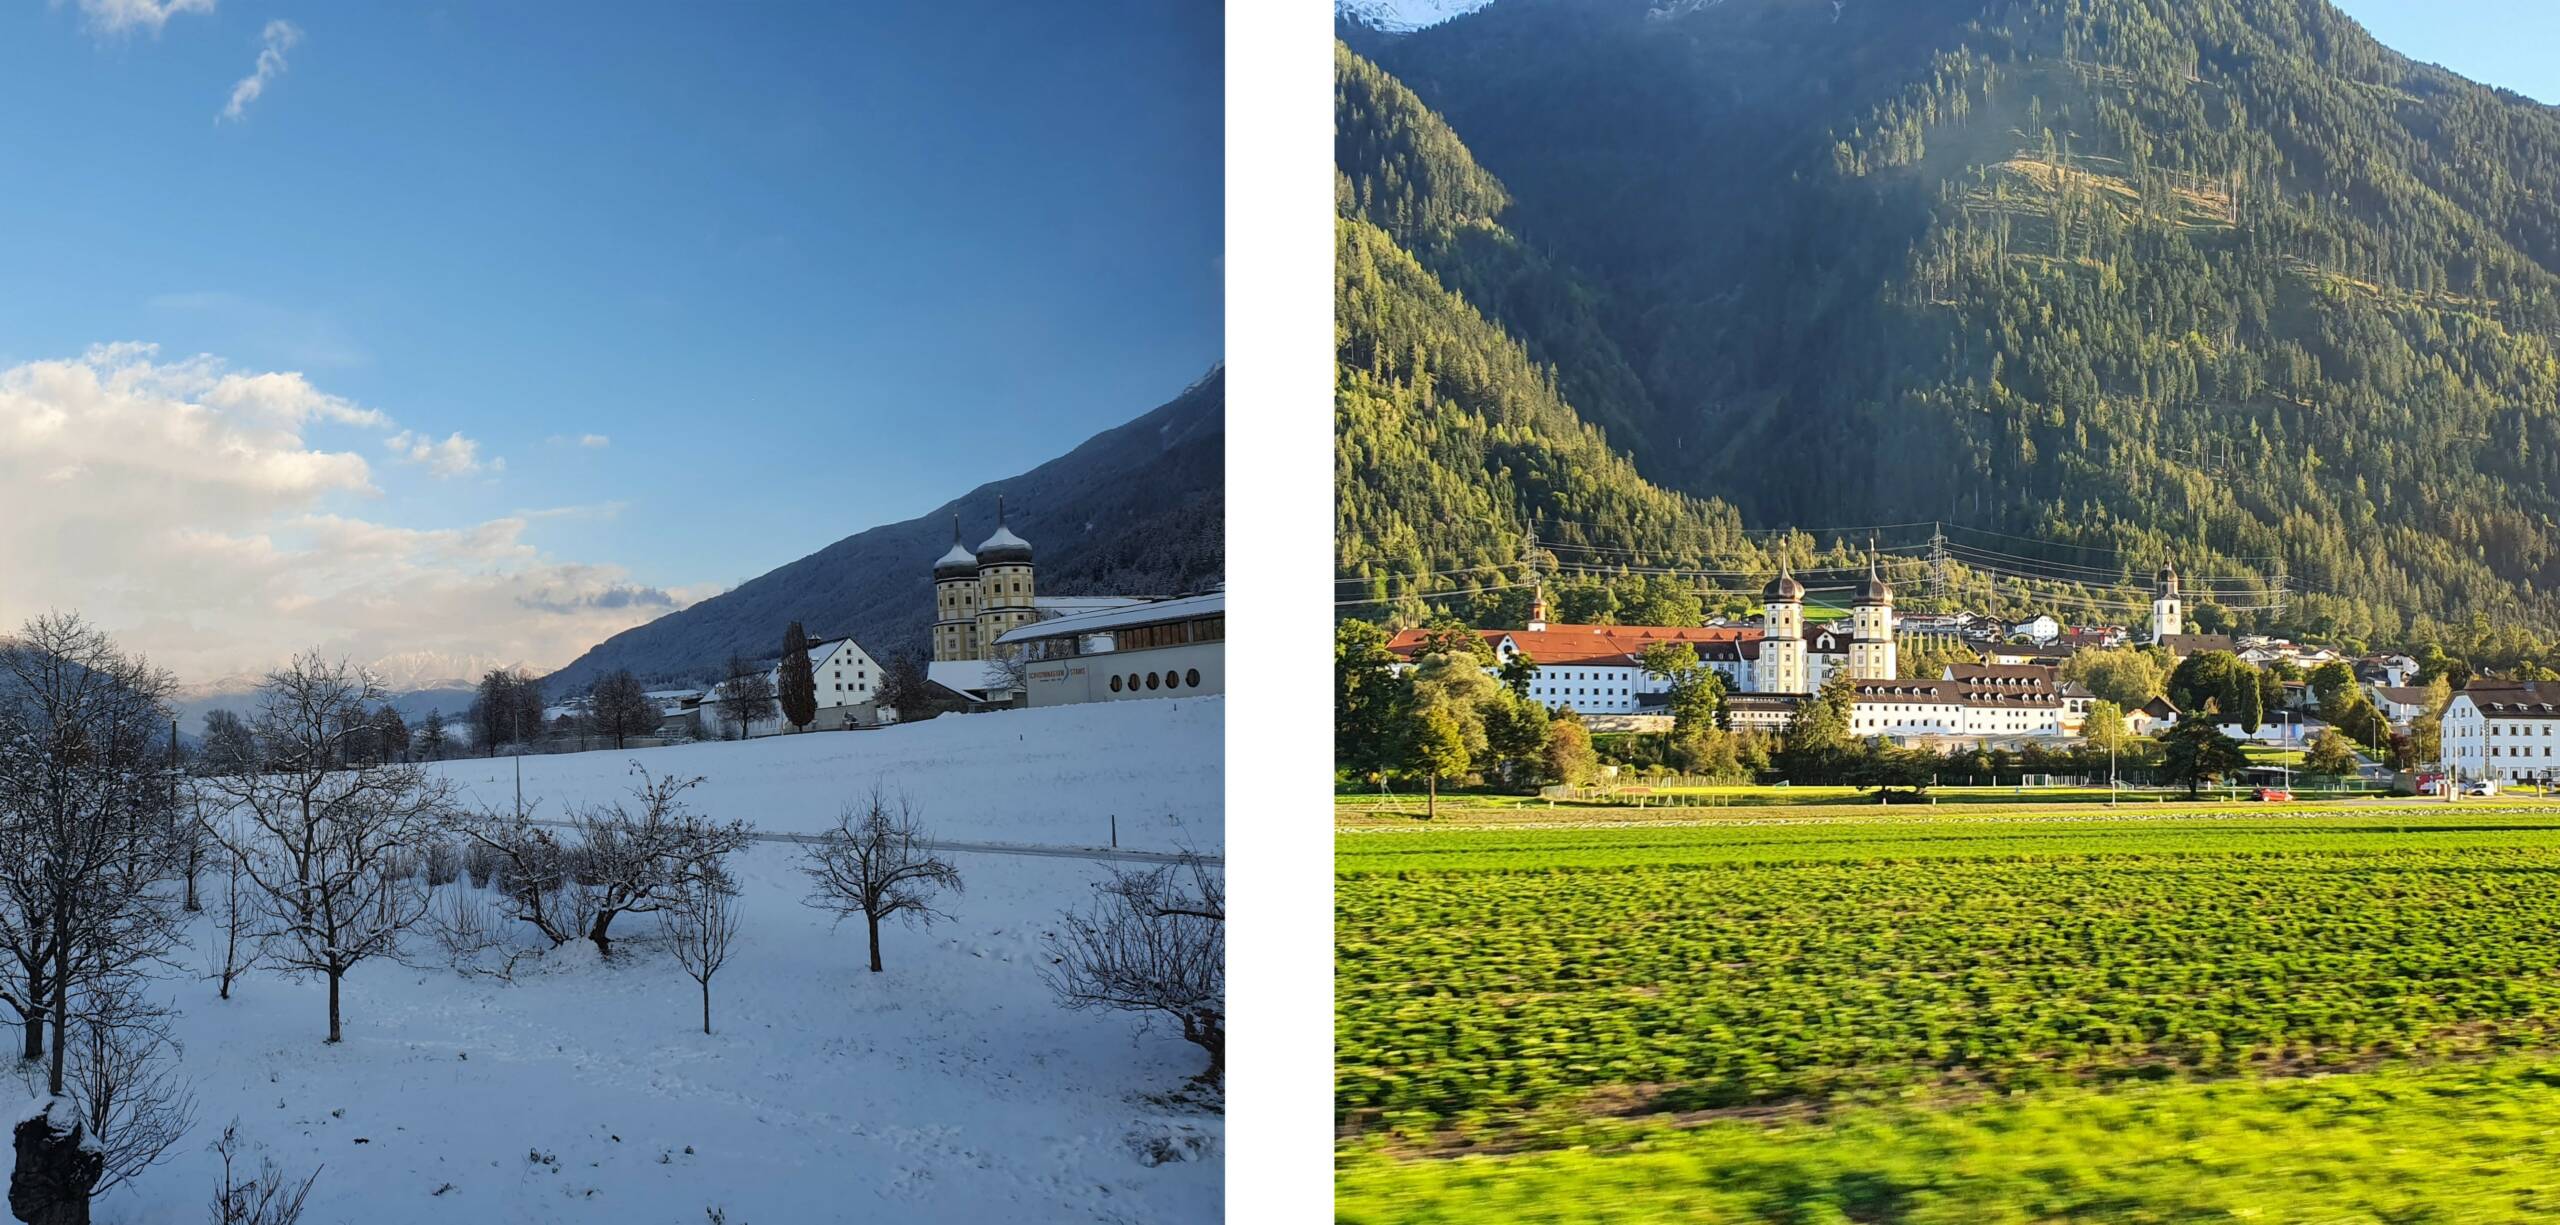 Stams in winter vs. in early autumn